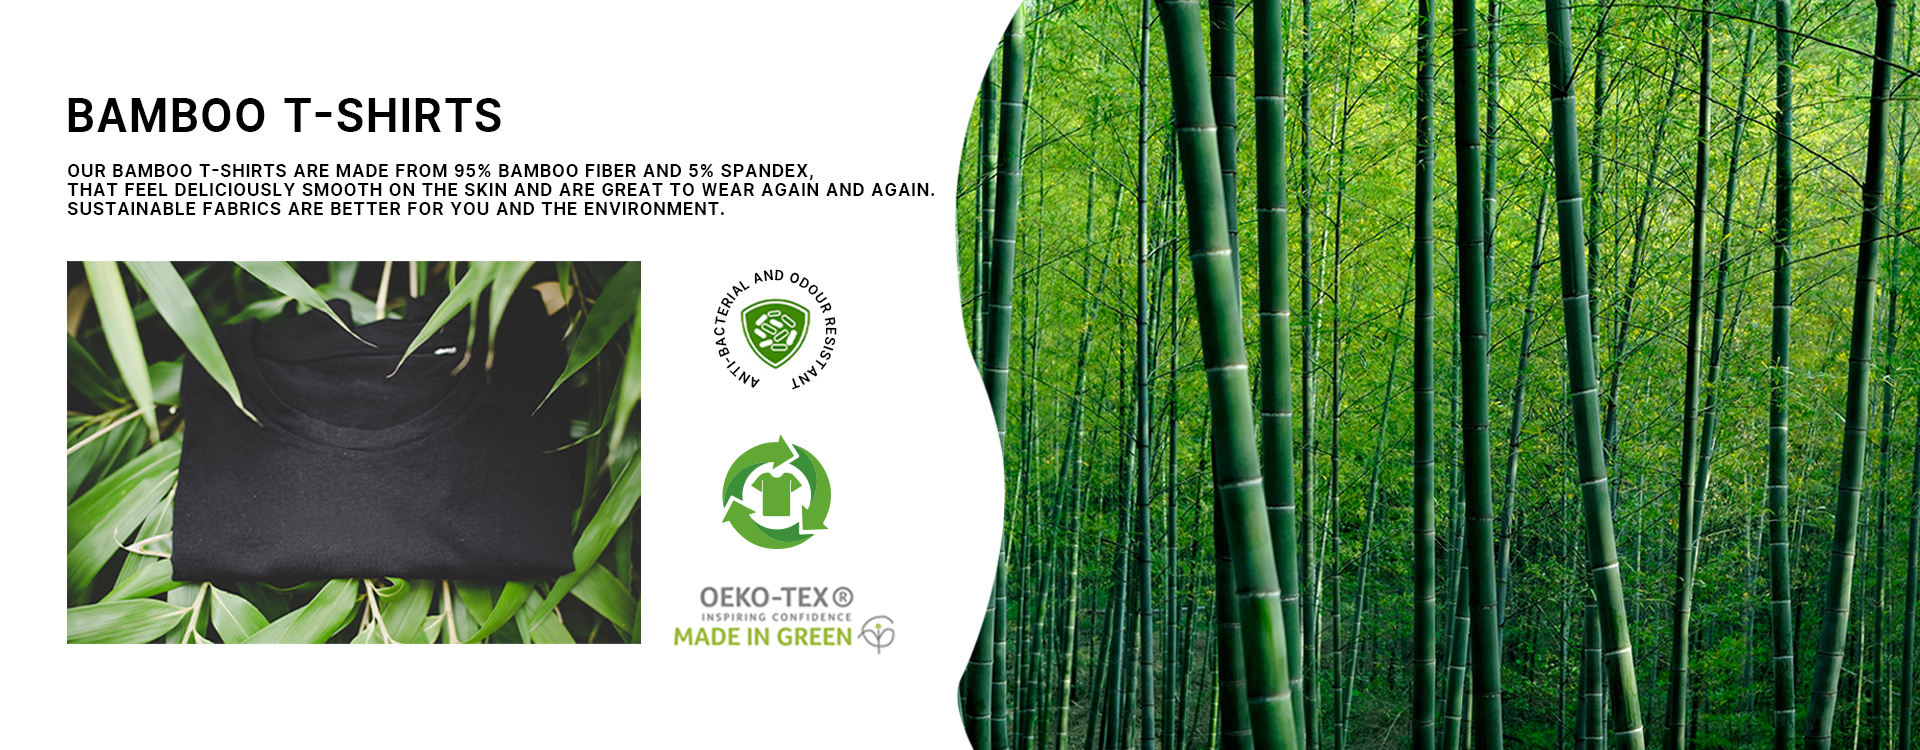 News - Bamboo Fabric Benefits: Why It's a Great Sustainable Choice